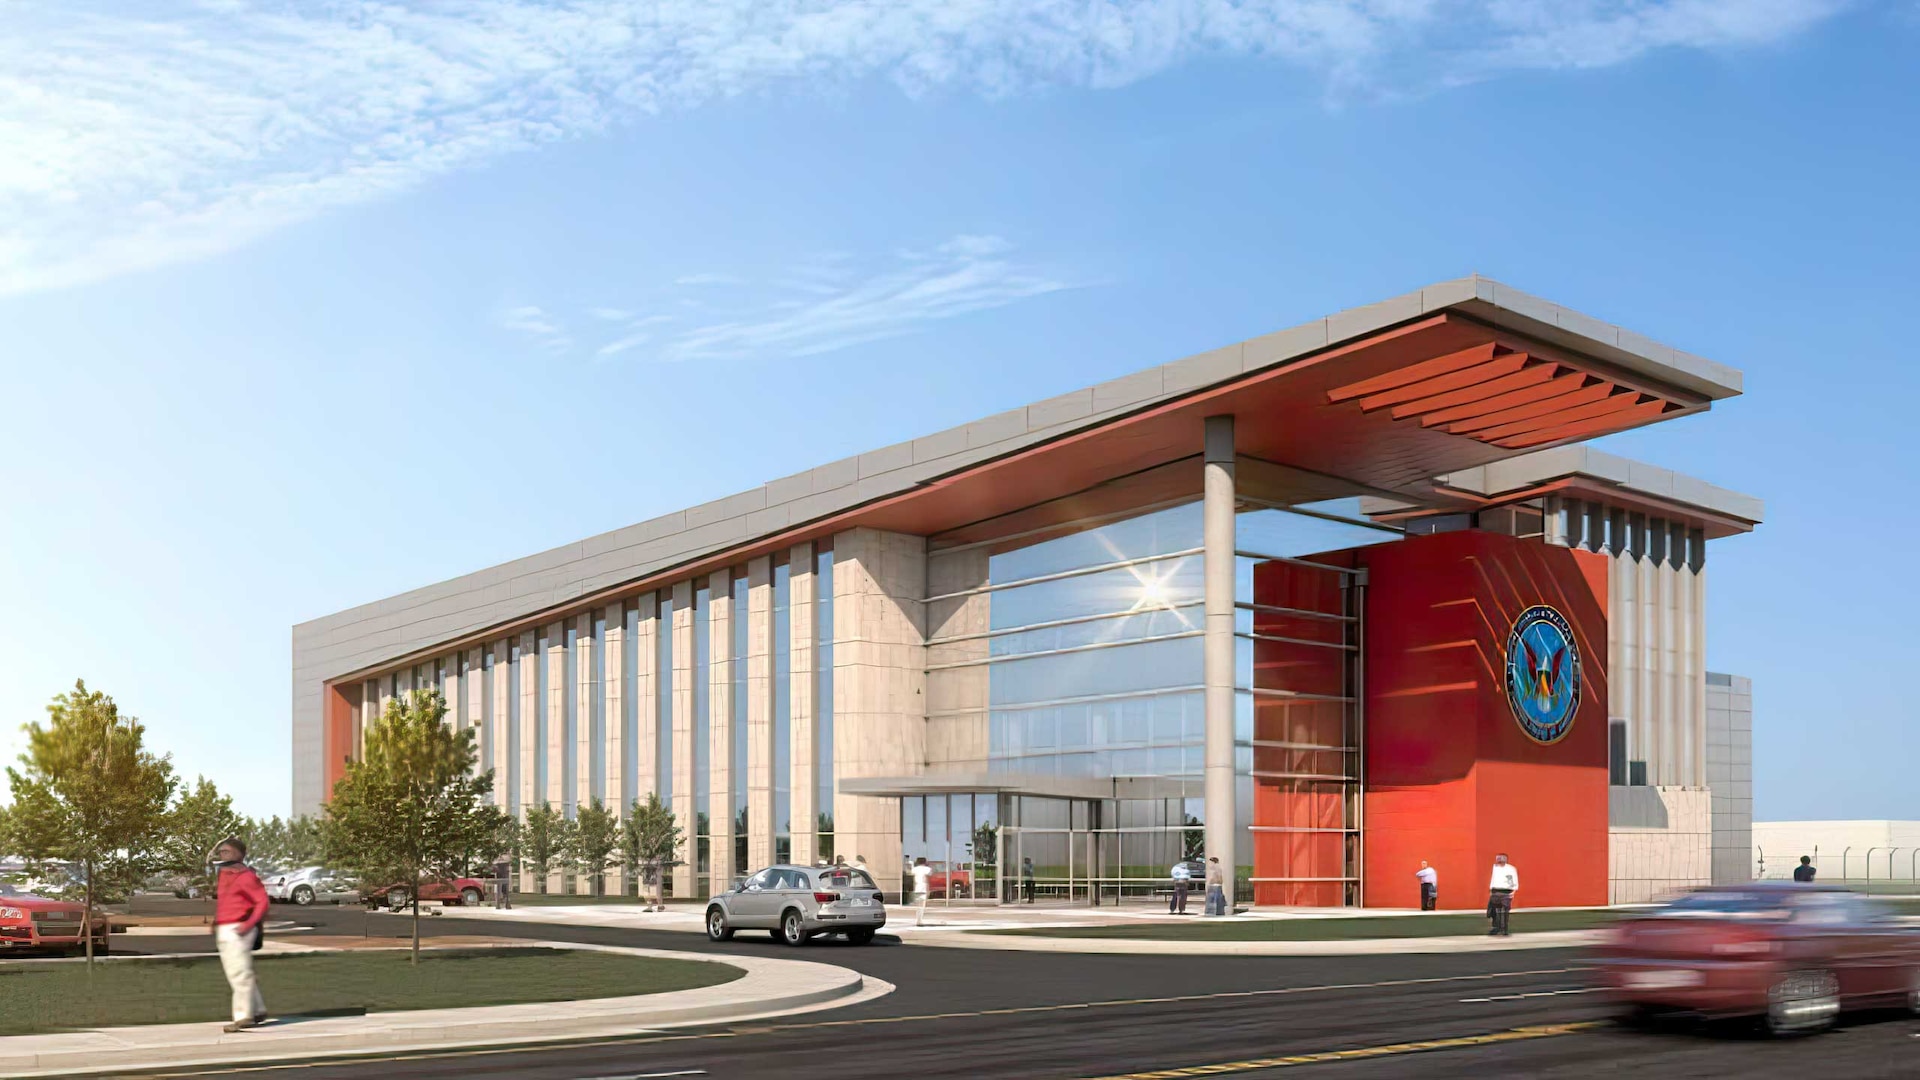 Congratulations to the DTRA ABQ MILCON for being recognized by SAME – Society of American Military Engineers with a Merit Award as Best Design 2022. This award was given  for the design of the new Facility that just broke ground in December at Kirkland Air Force Base, NM.